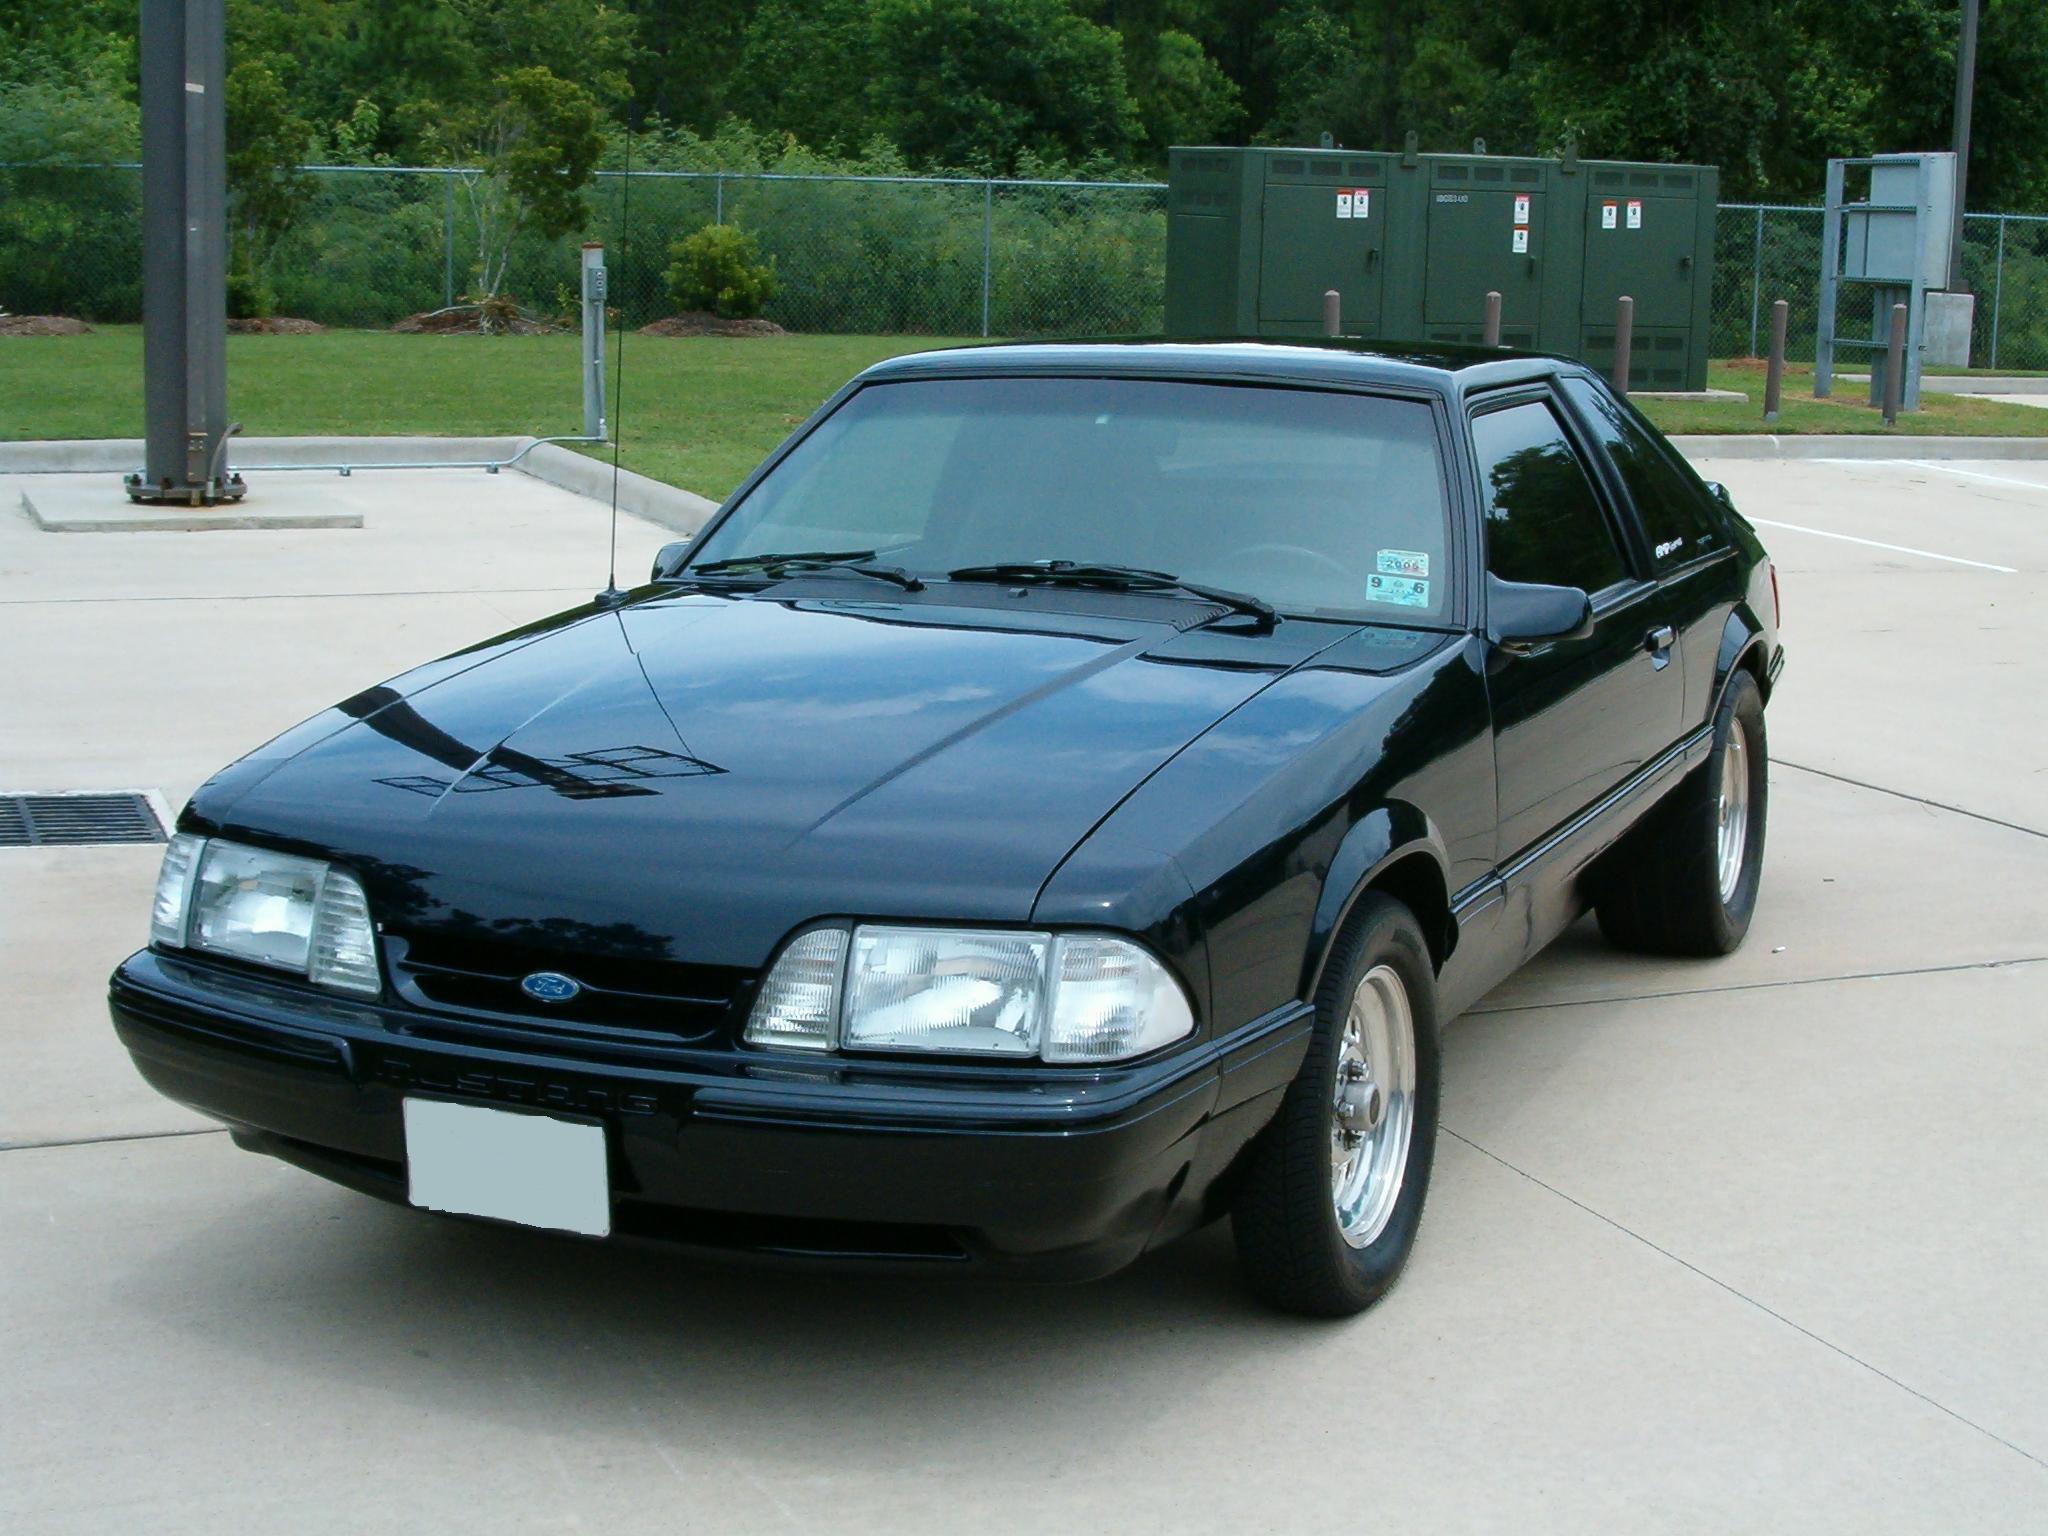 1989 Ford mustang lx specs #10